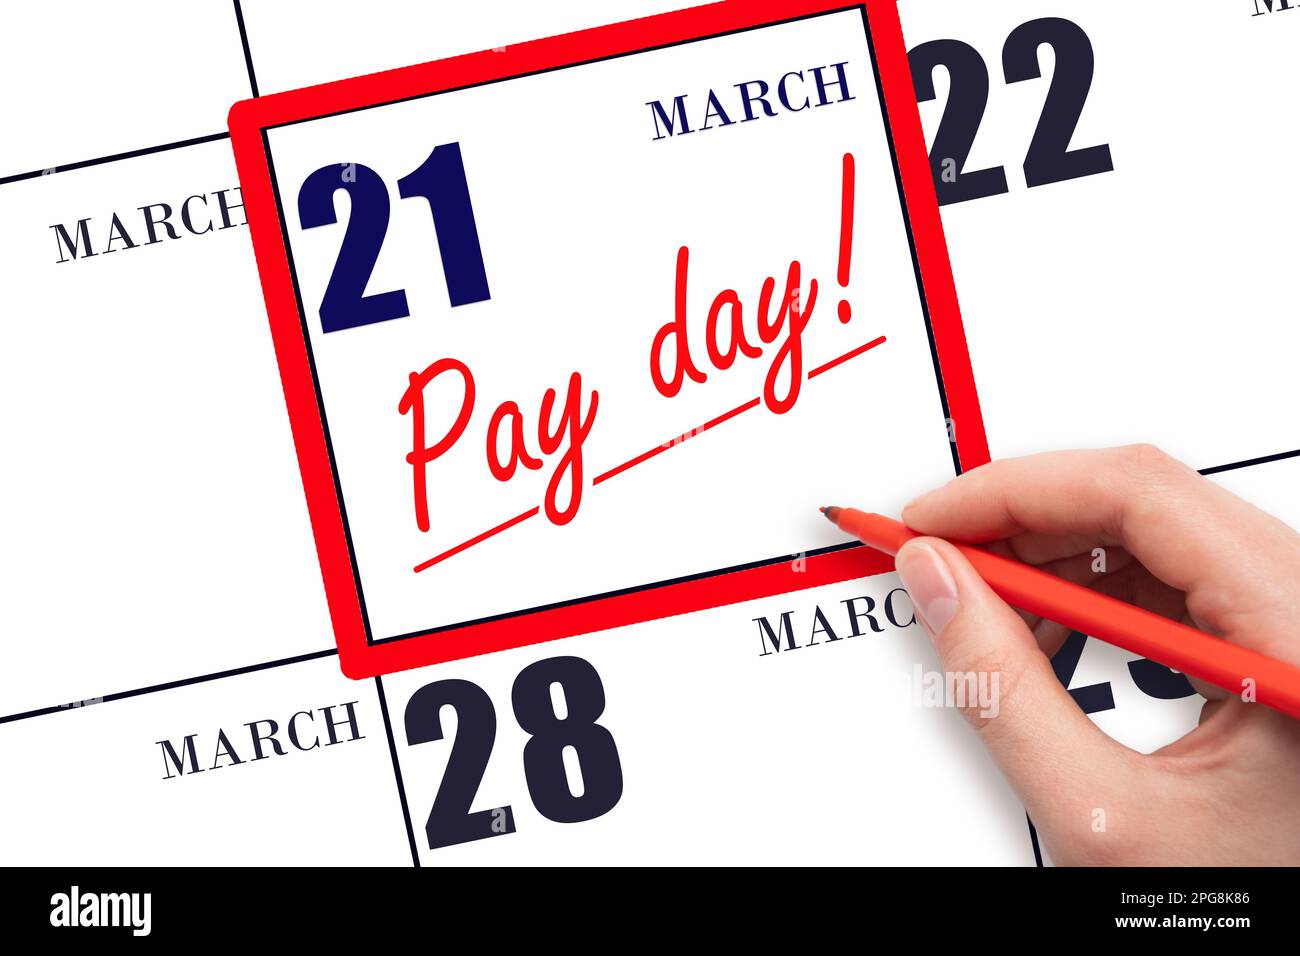 21st day of March. Hand writing text PAY DATE on calendar date March 21 and underline it. Payment due date. Reminder concept of payment. Spring month, Stock Photo